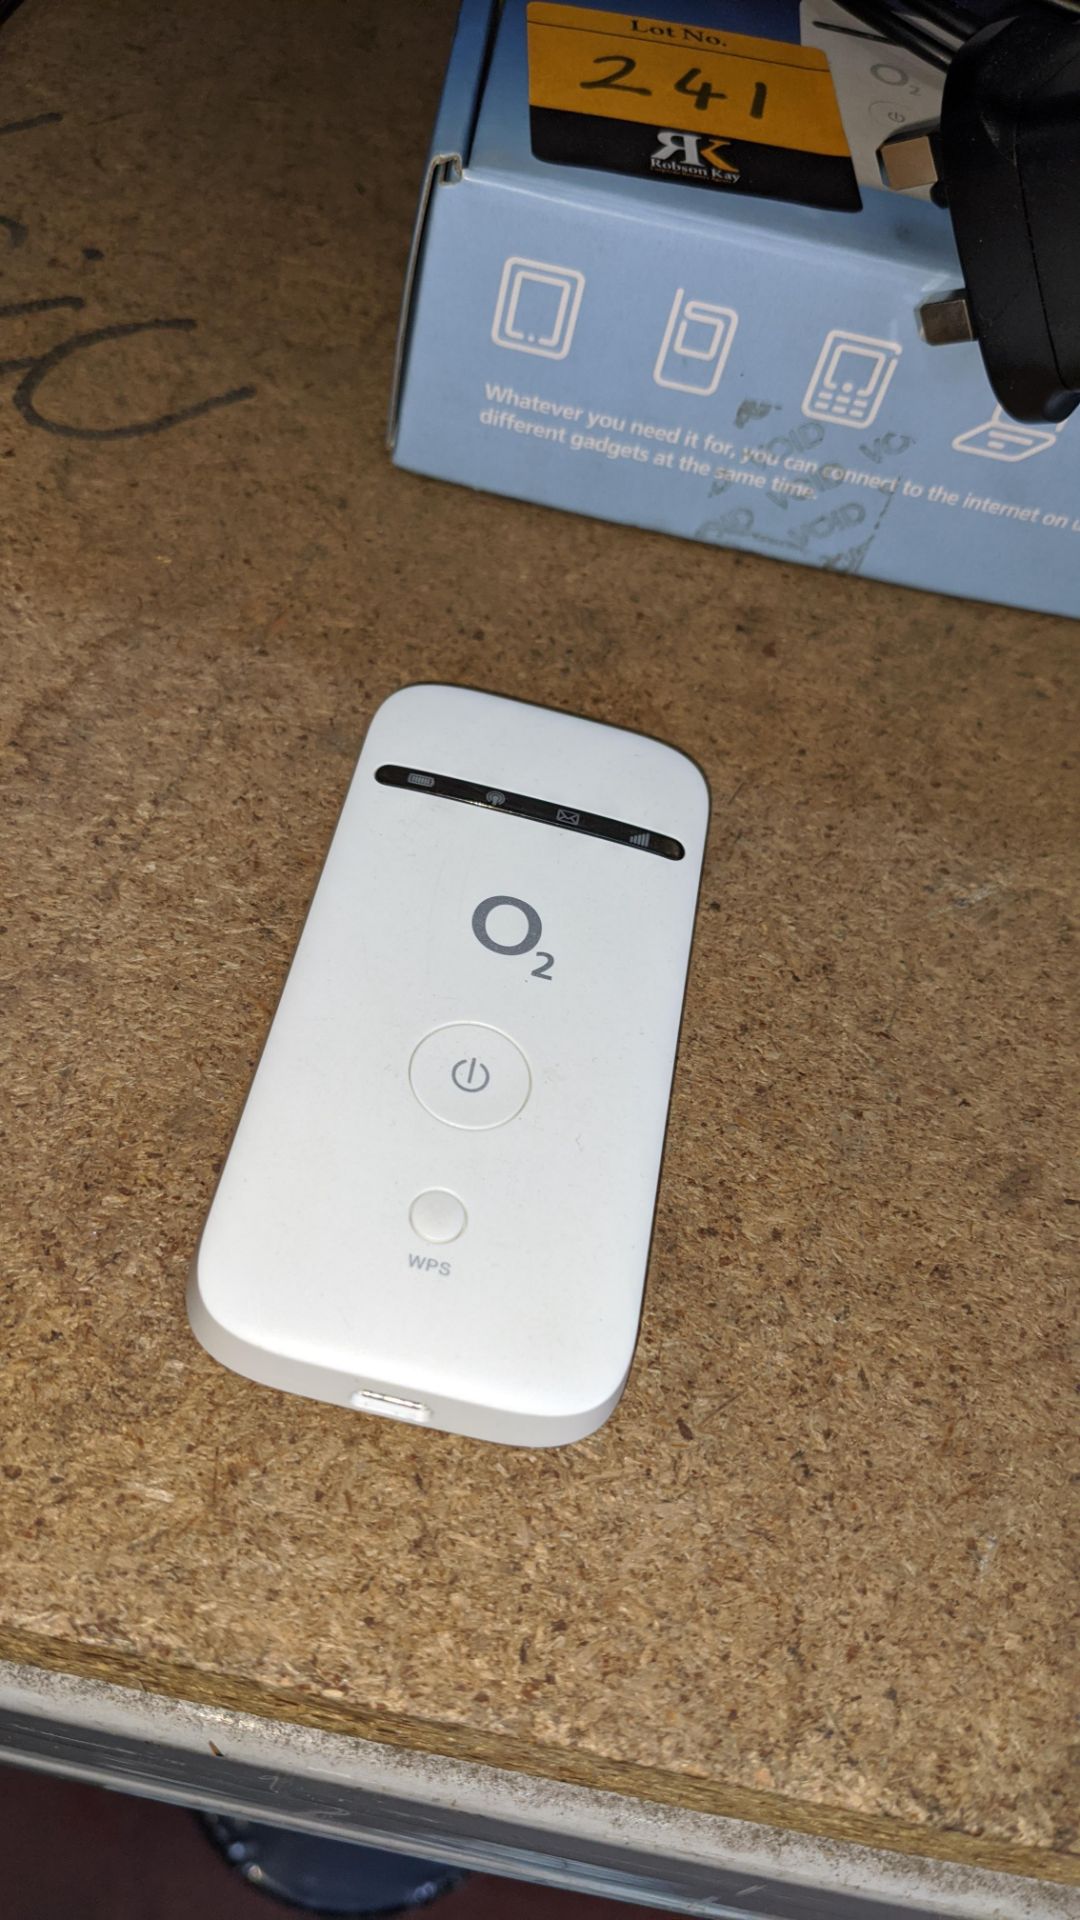 Mobile Wi-Fi O2 pocket hot spot including box & charger - Image 5 of 5